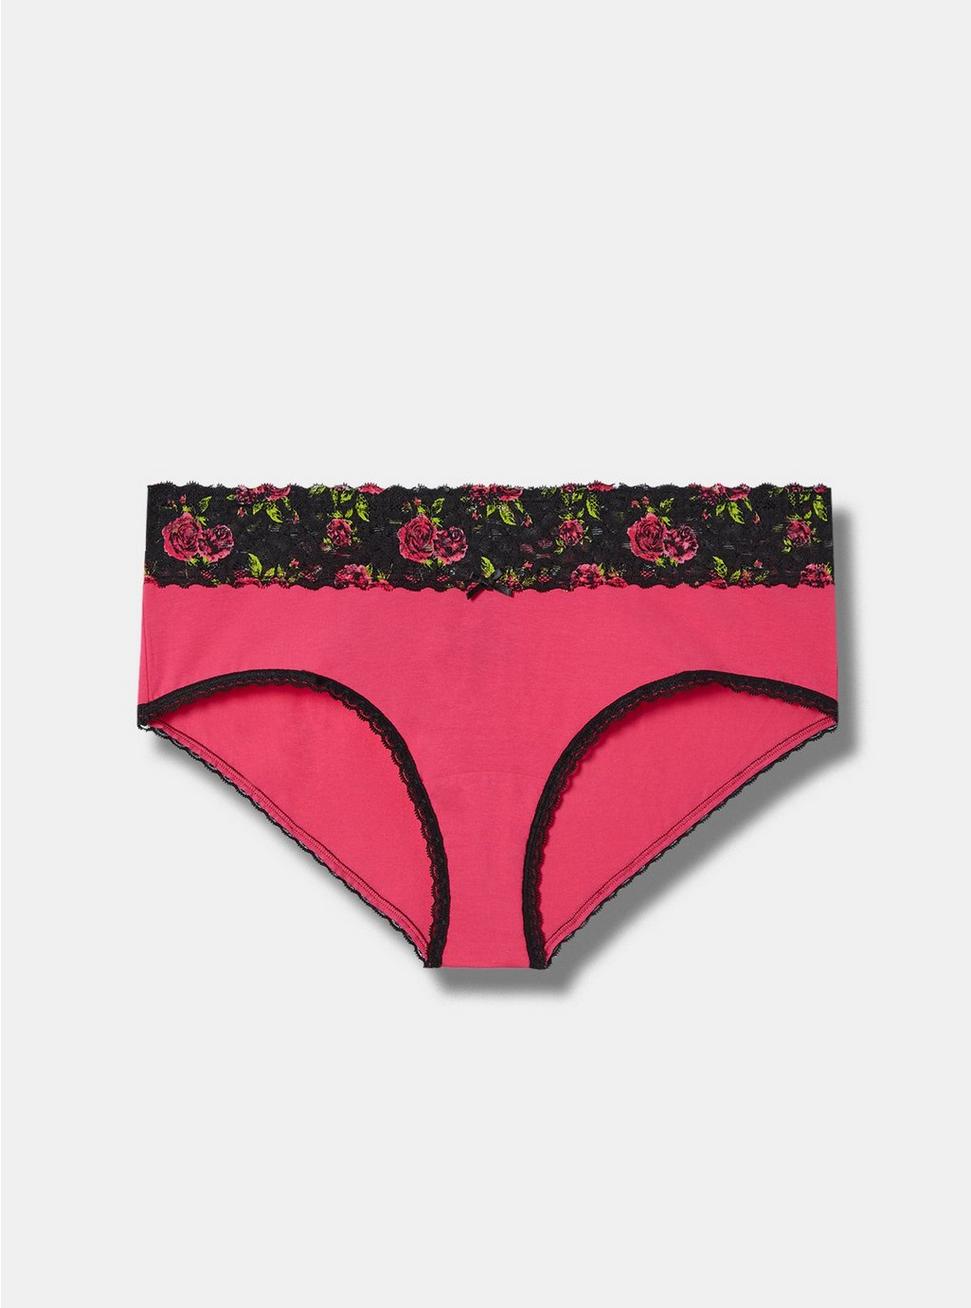 Cotton Mid Rise Cheeky Lace Panty, CABARET BRUSHED ROSES FLORAL, hi-res